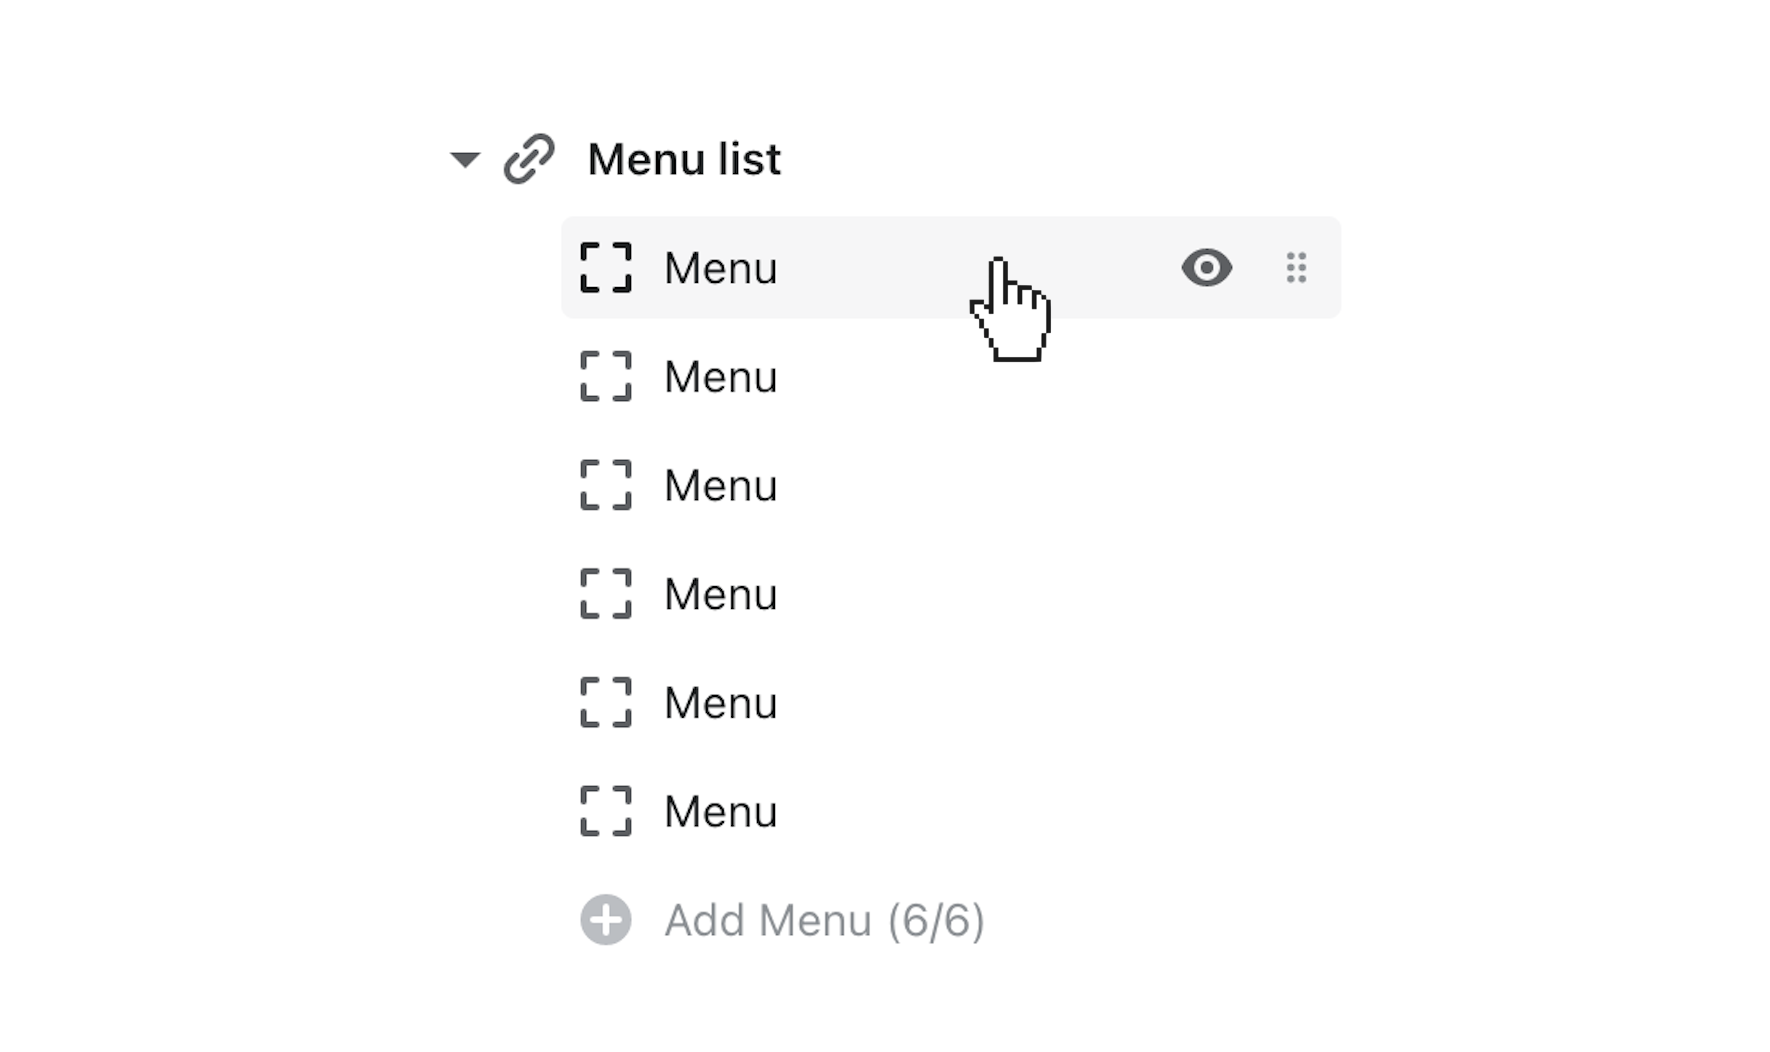 click_one_of_the_menu_blocks_to_customize_its_content.png